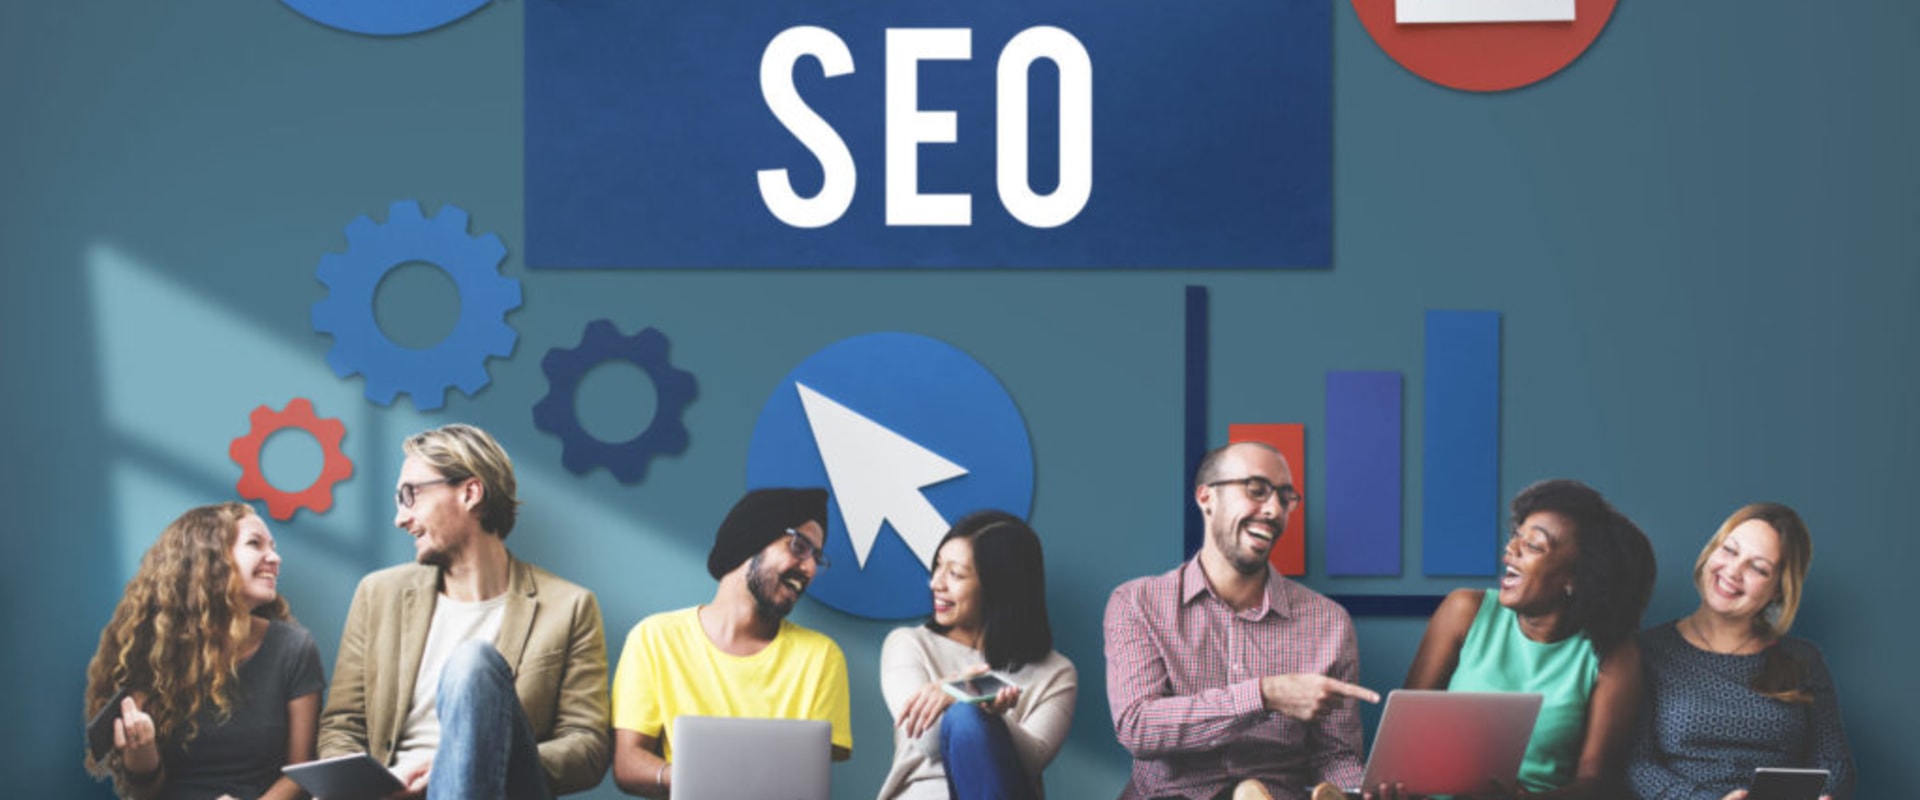 Why is learning seo important?